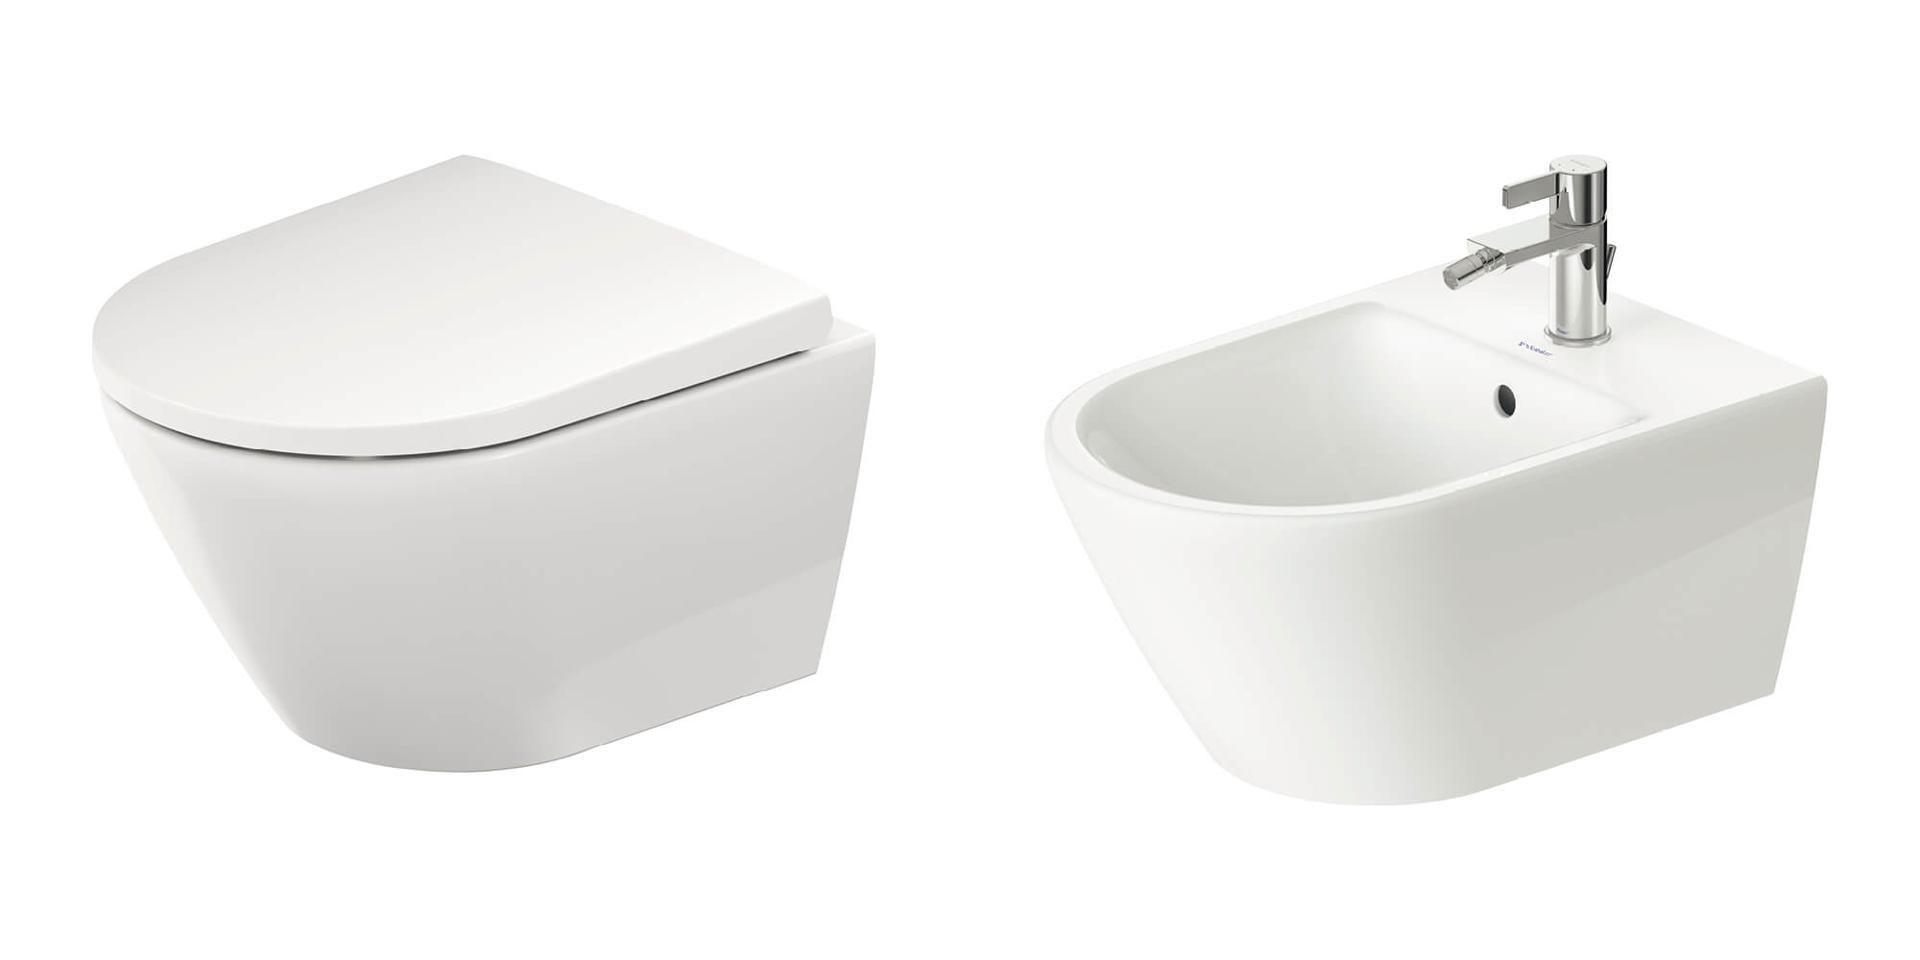 Toilet and bidet of the D-Neo series
